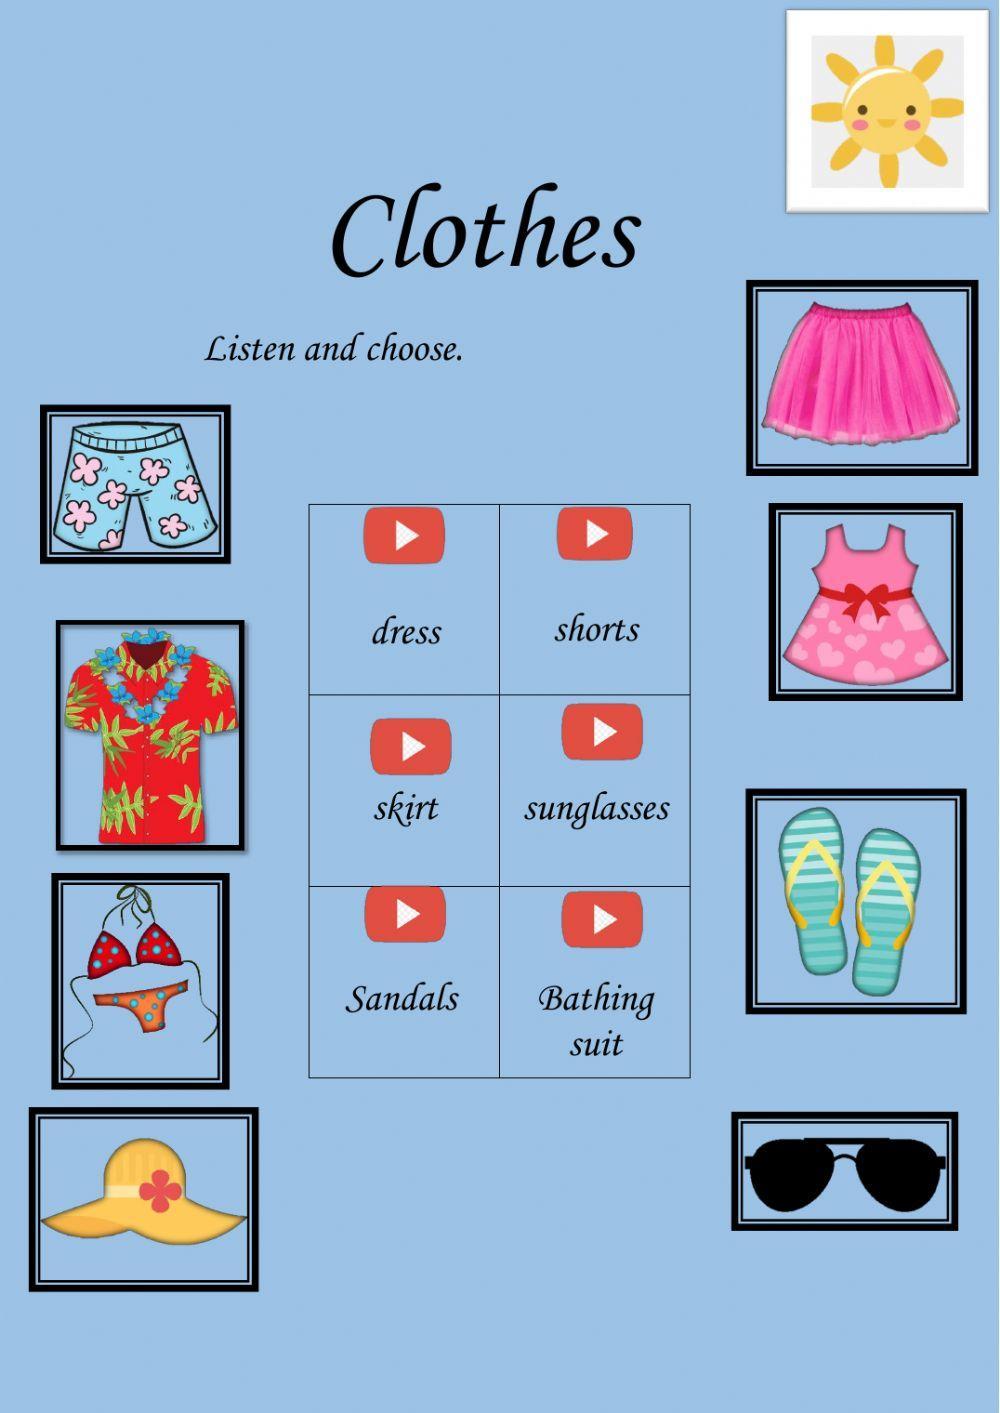 Weather and clotes 1